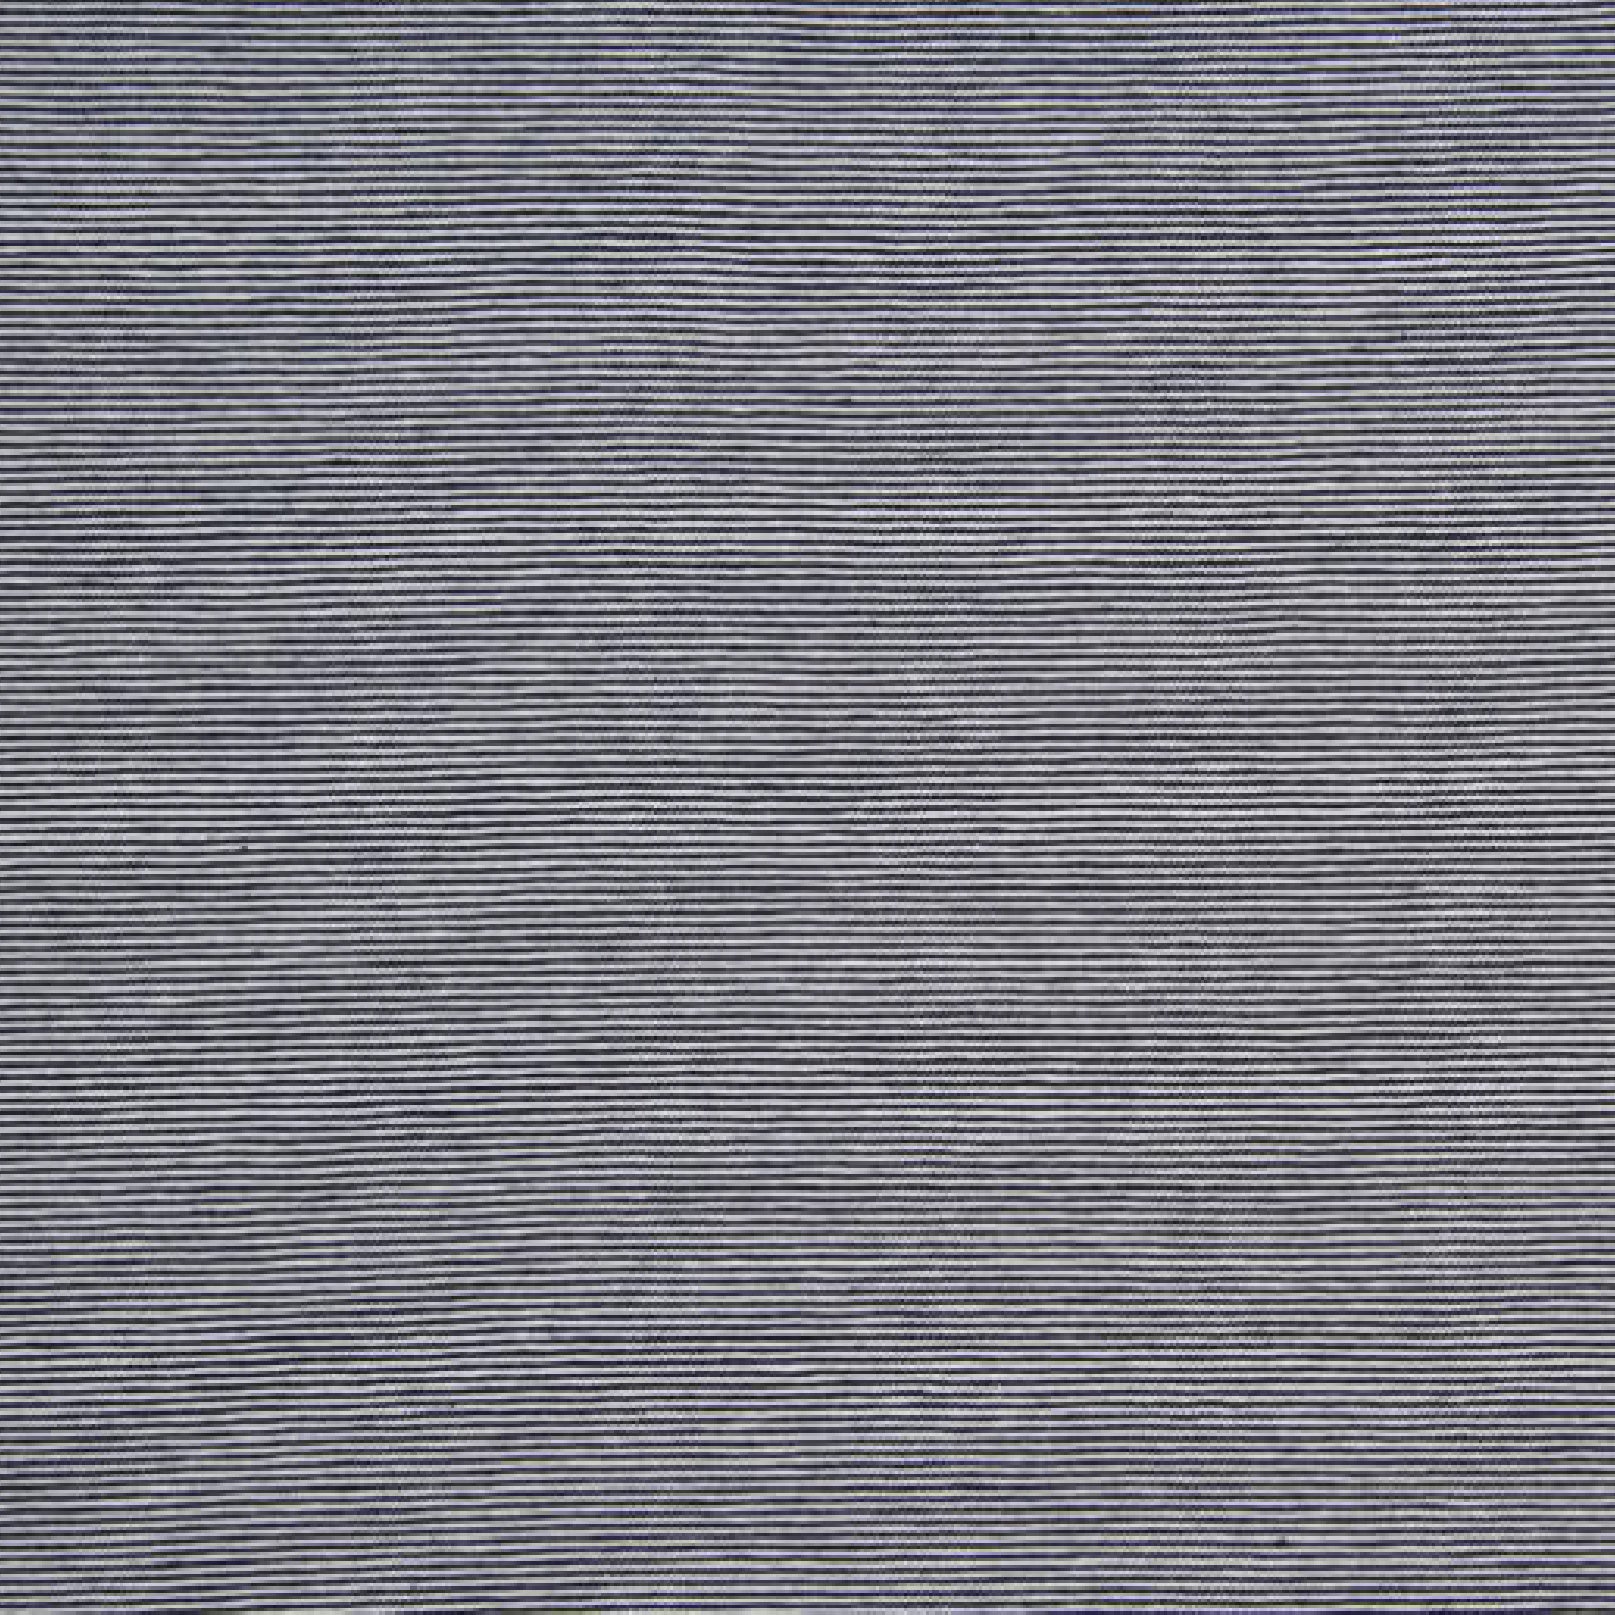 Striped navy blue and white 1 mm - Striped jersey